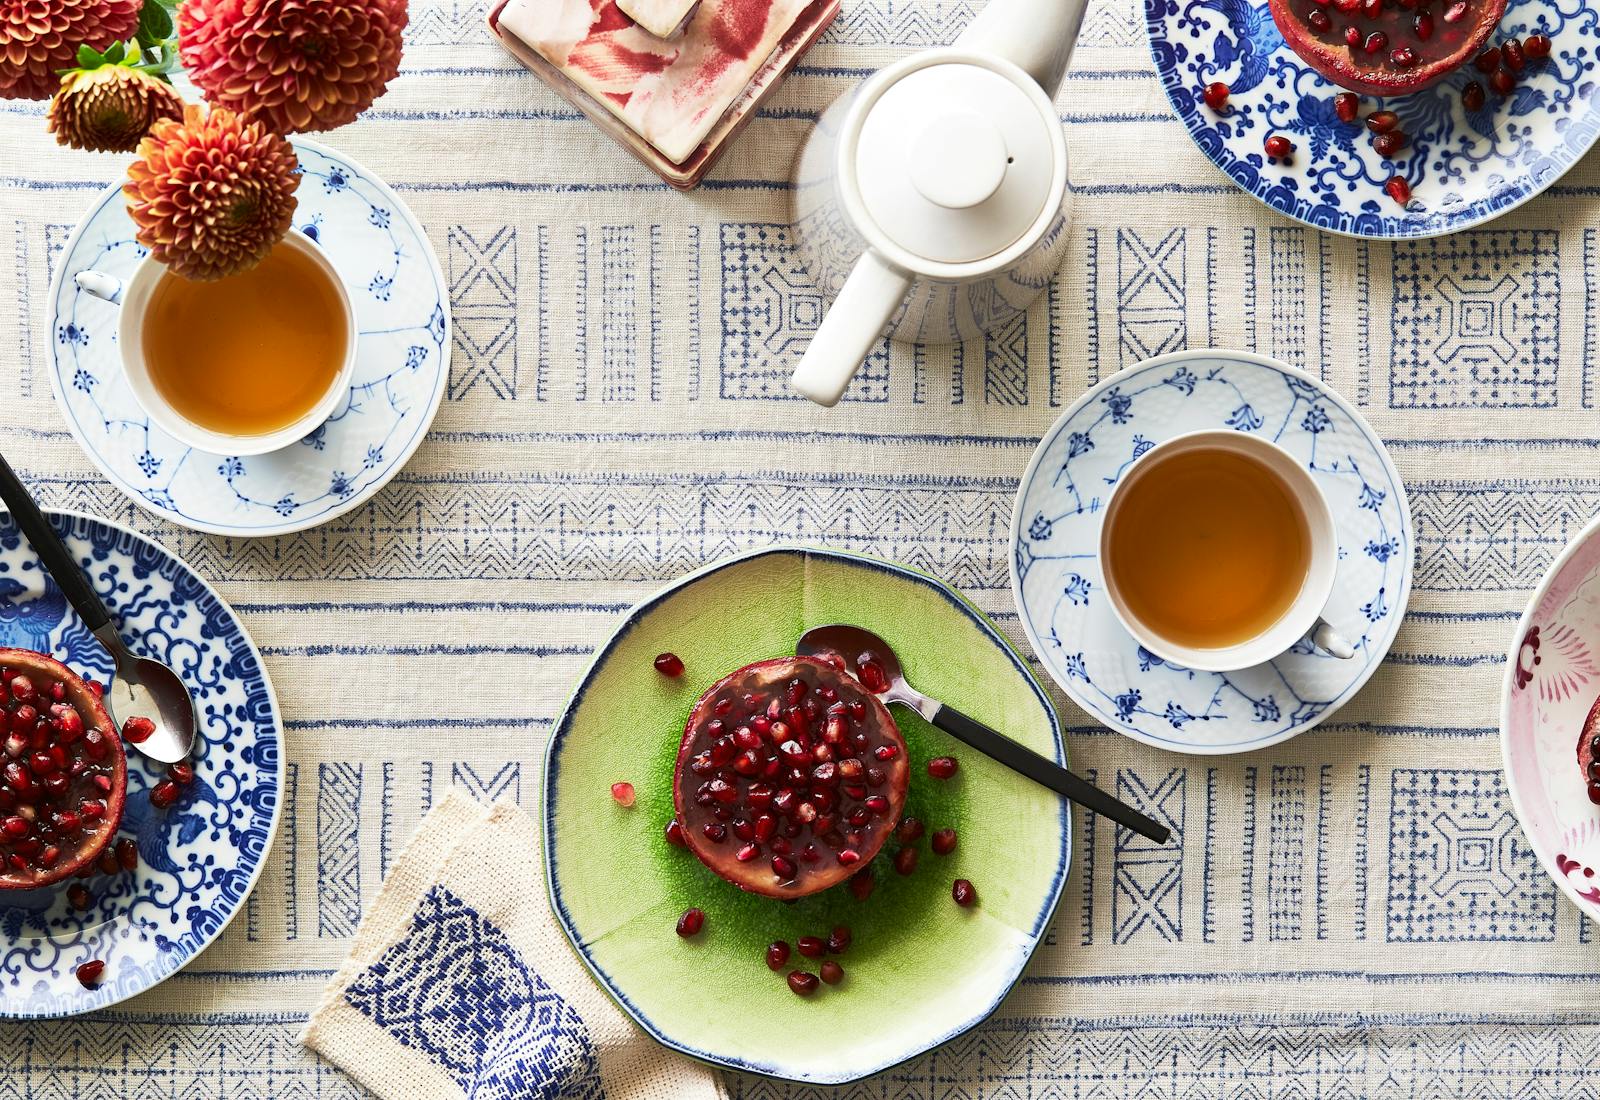 Table spread of 3 plates of pomegranate jelly atop blue and white tablecloth.